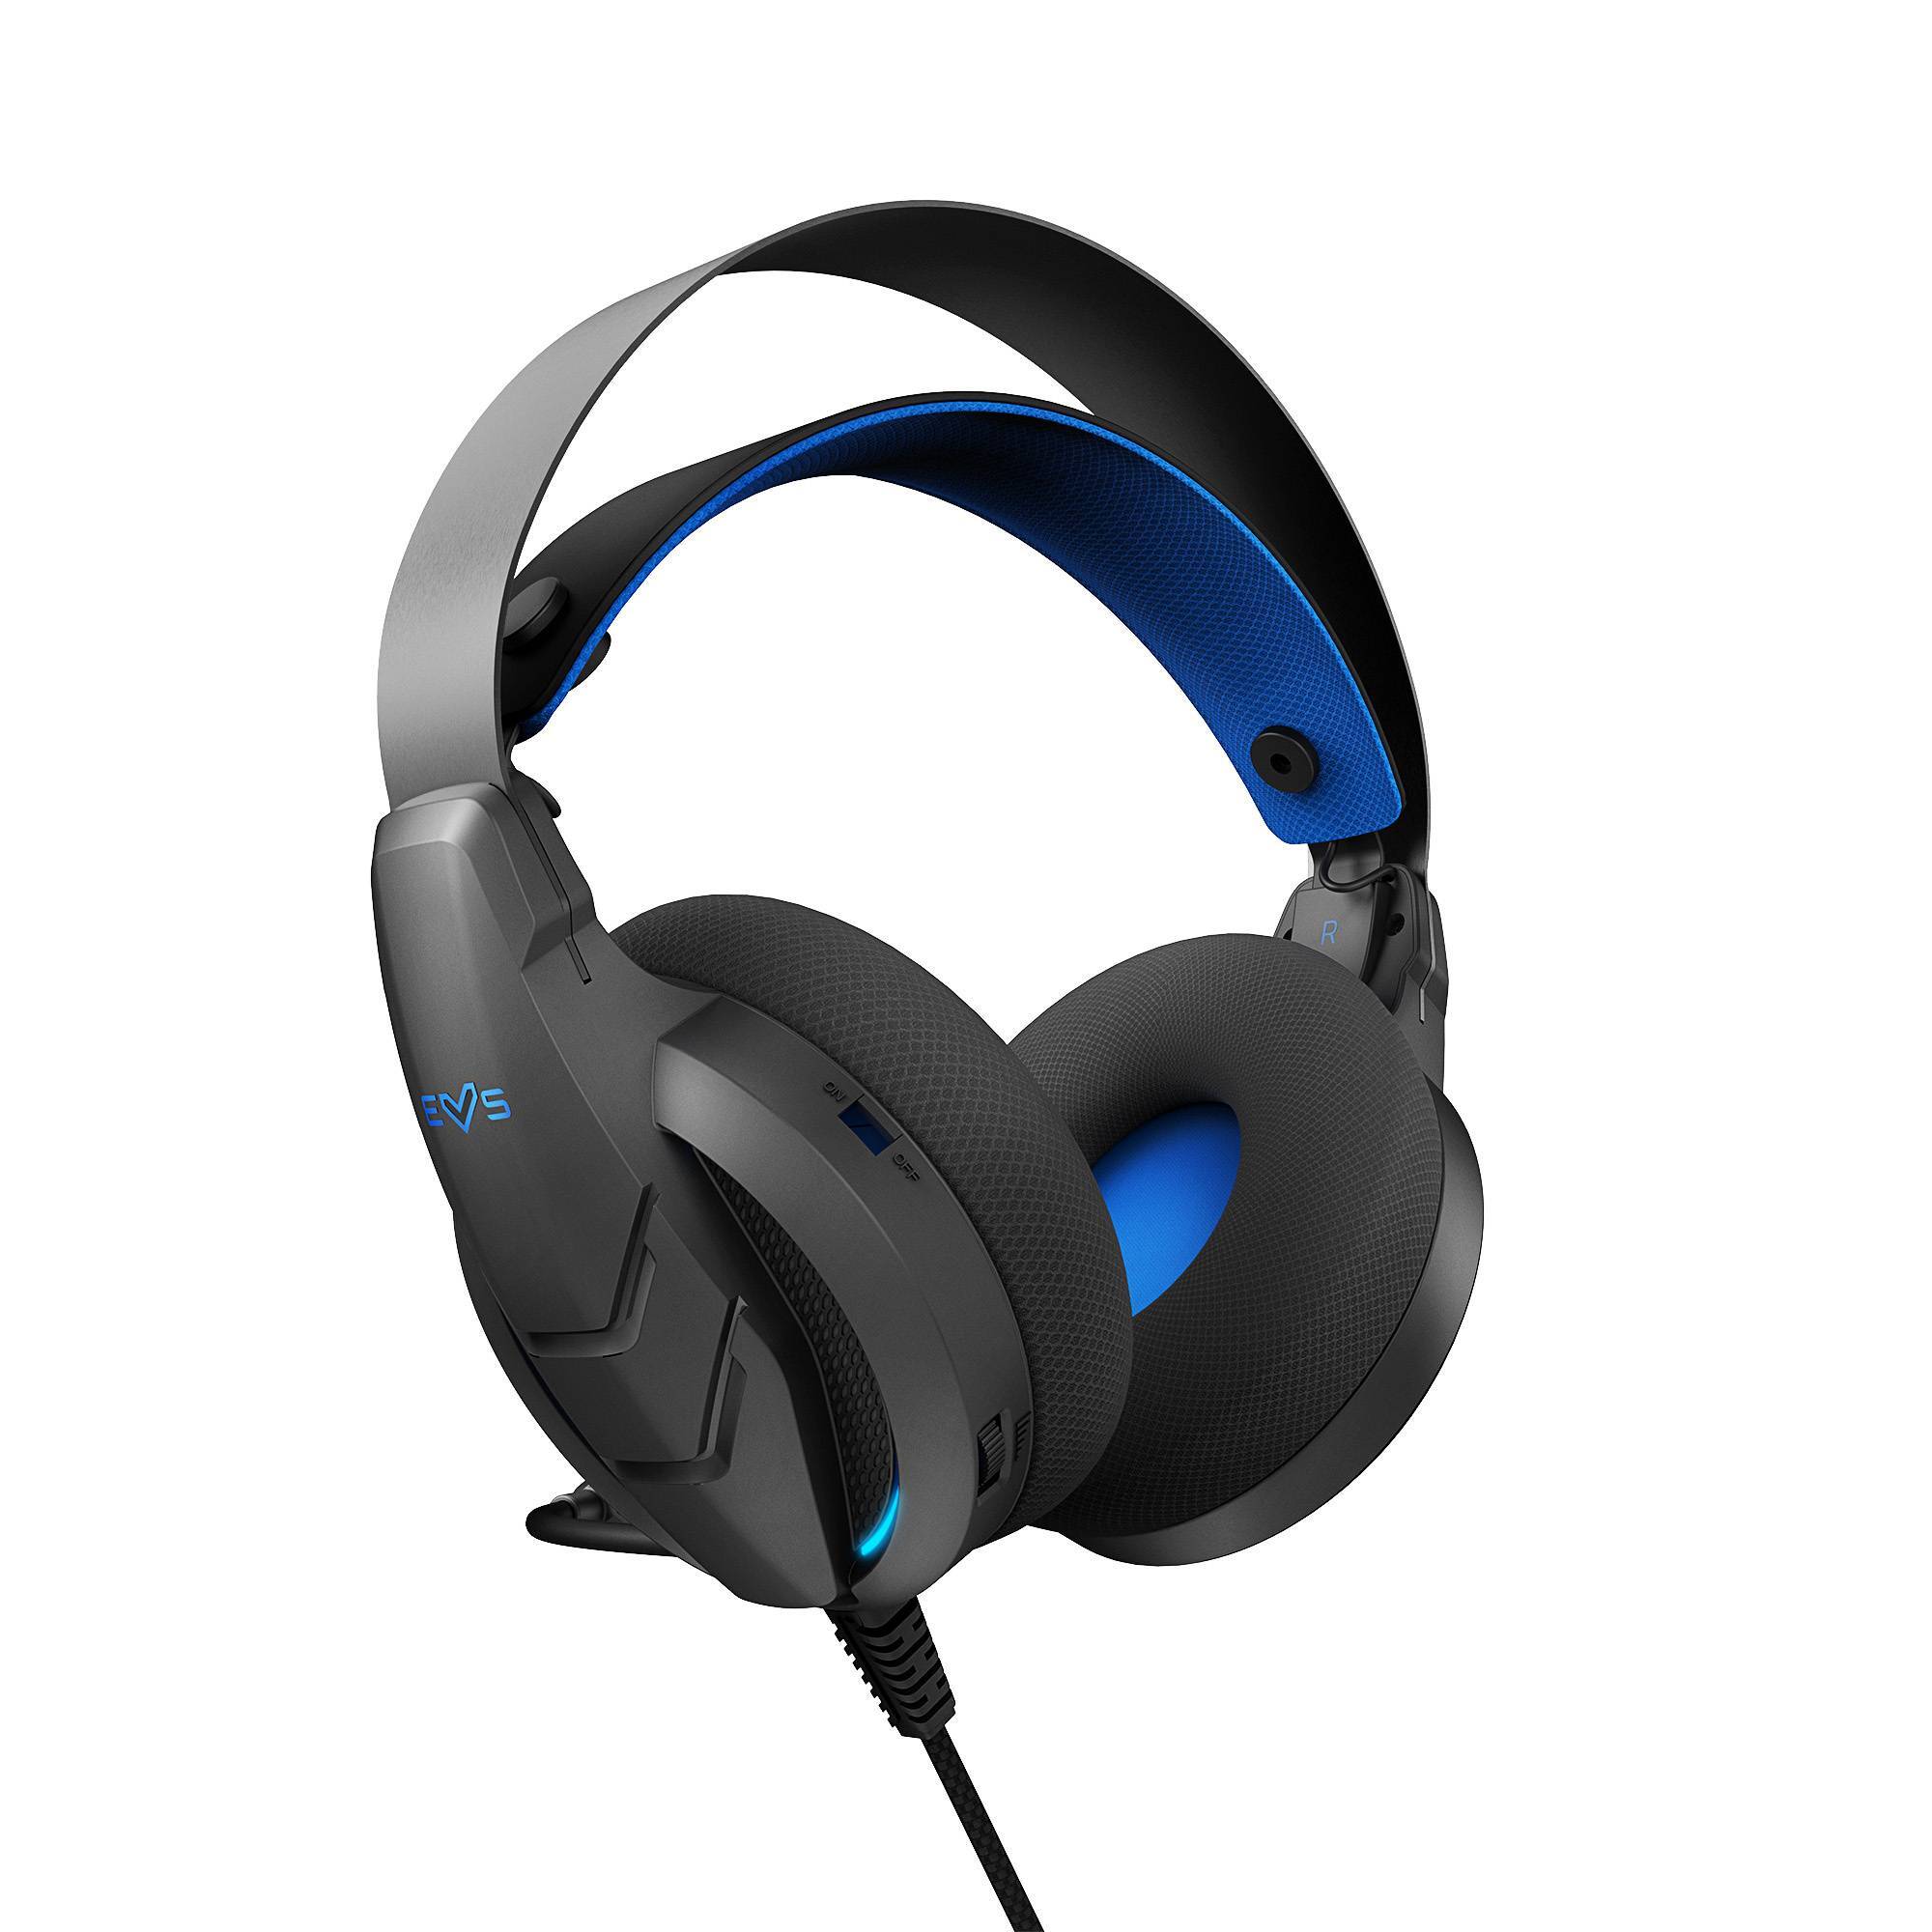 Gamer headset with ergonomic design and metal finishes